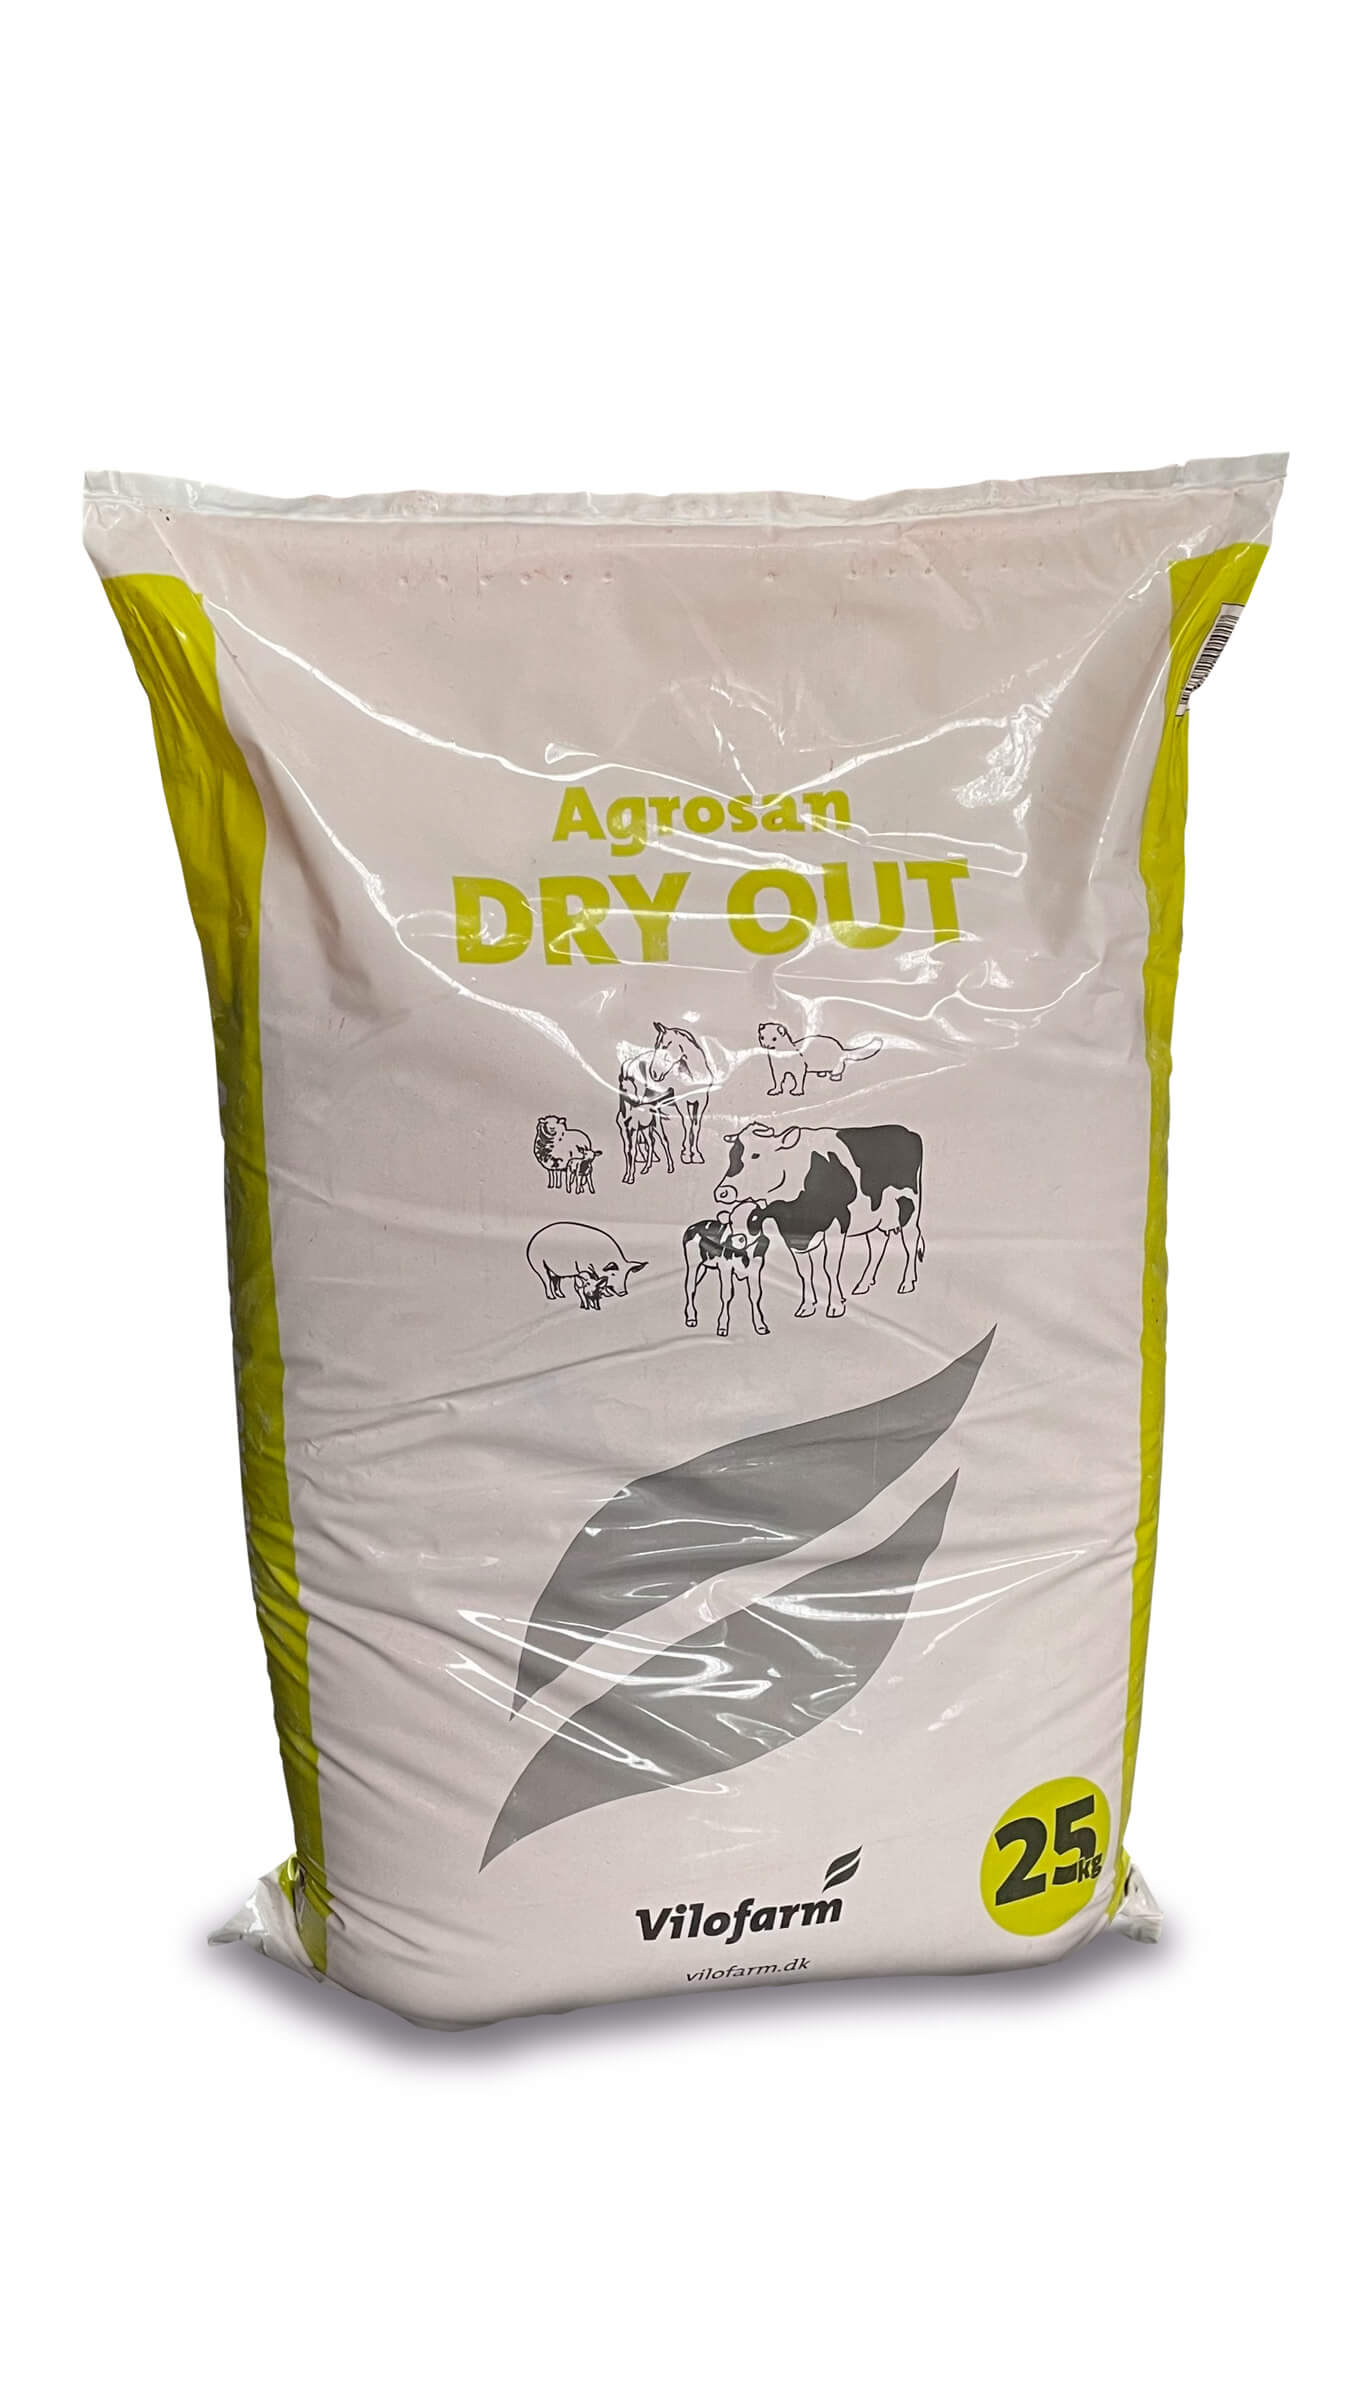 Agrosan Dry Out 25 kg